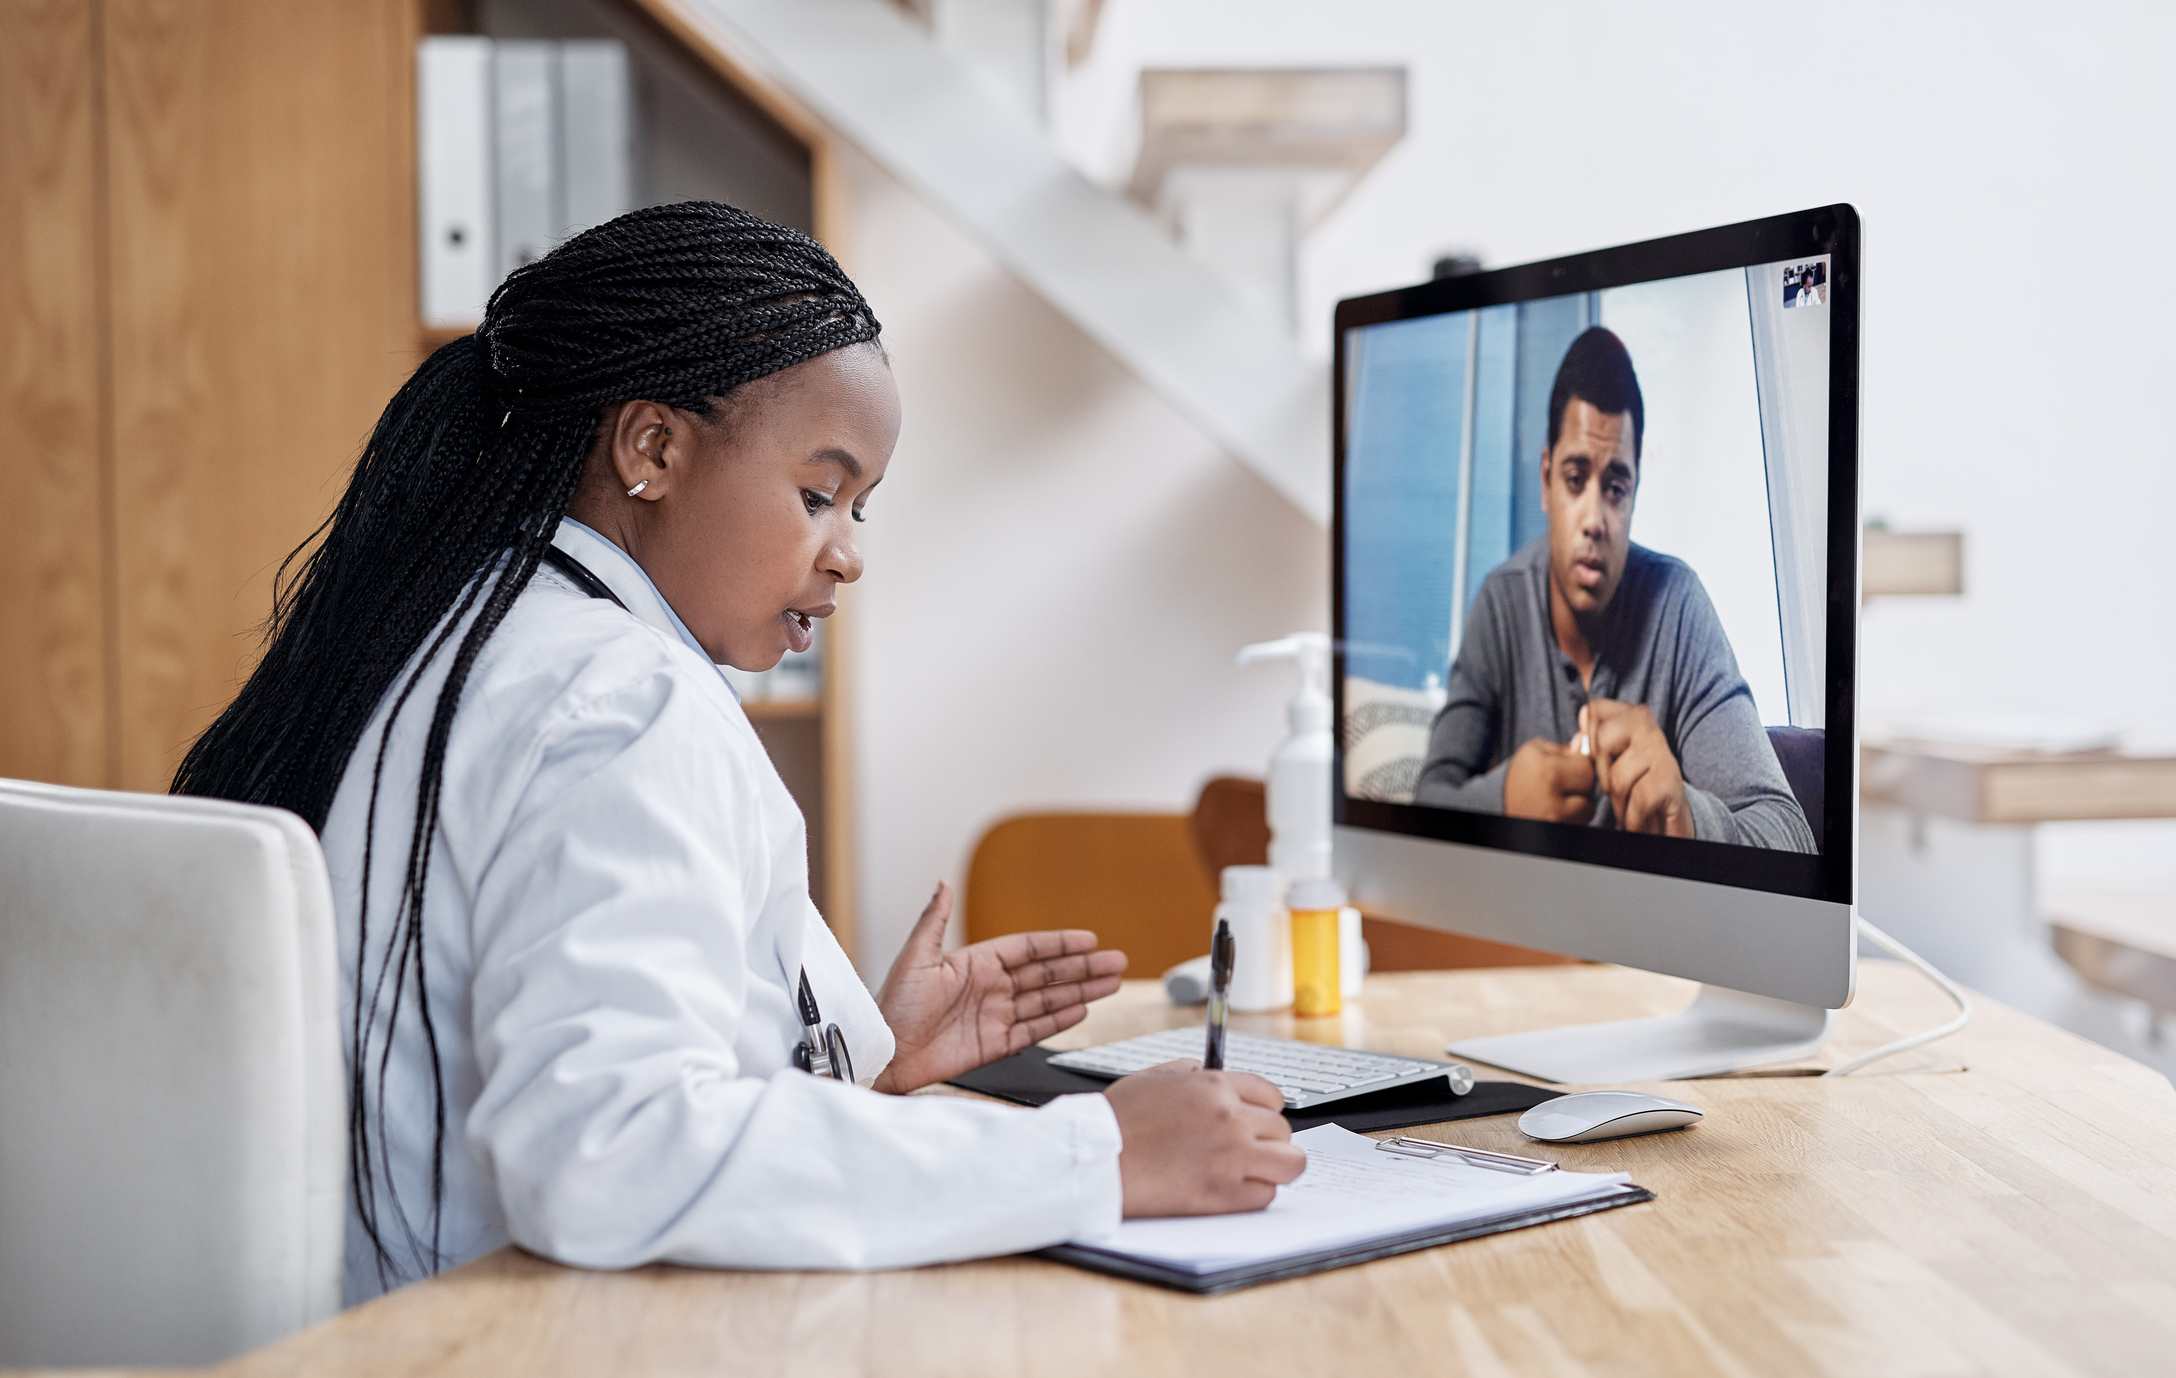 Shot of a young doctor writing notes during a video call with a patient on a computer.